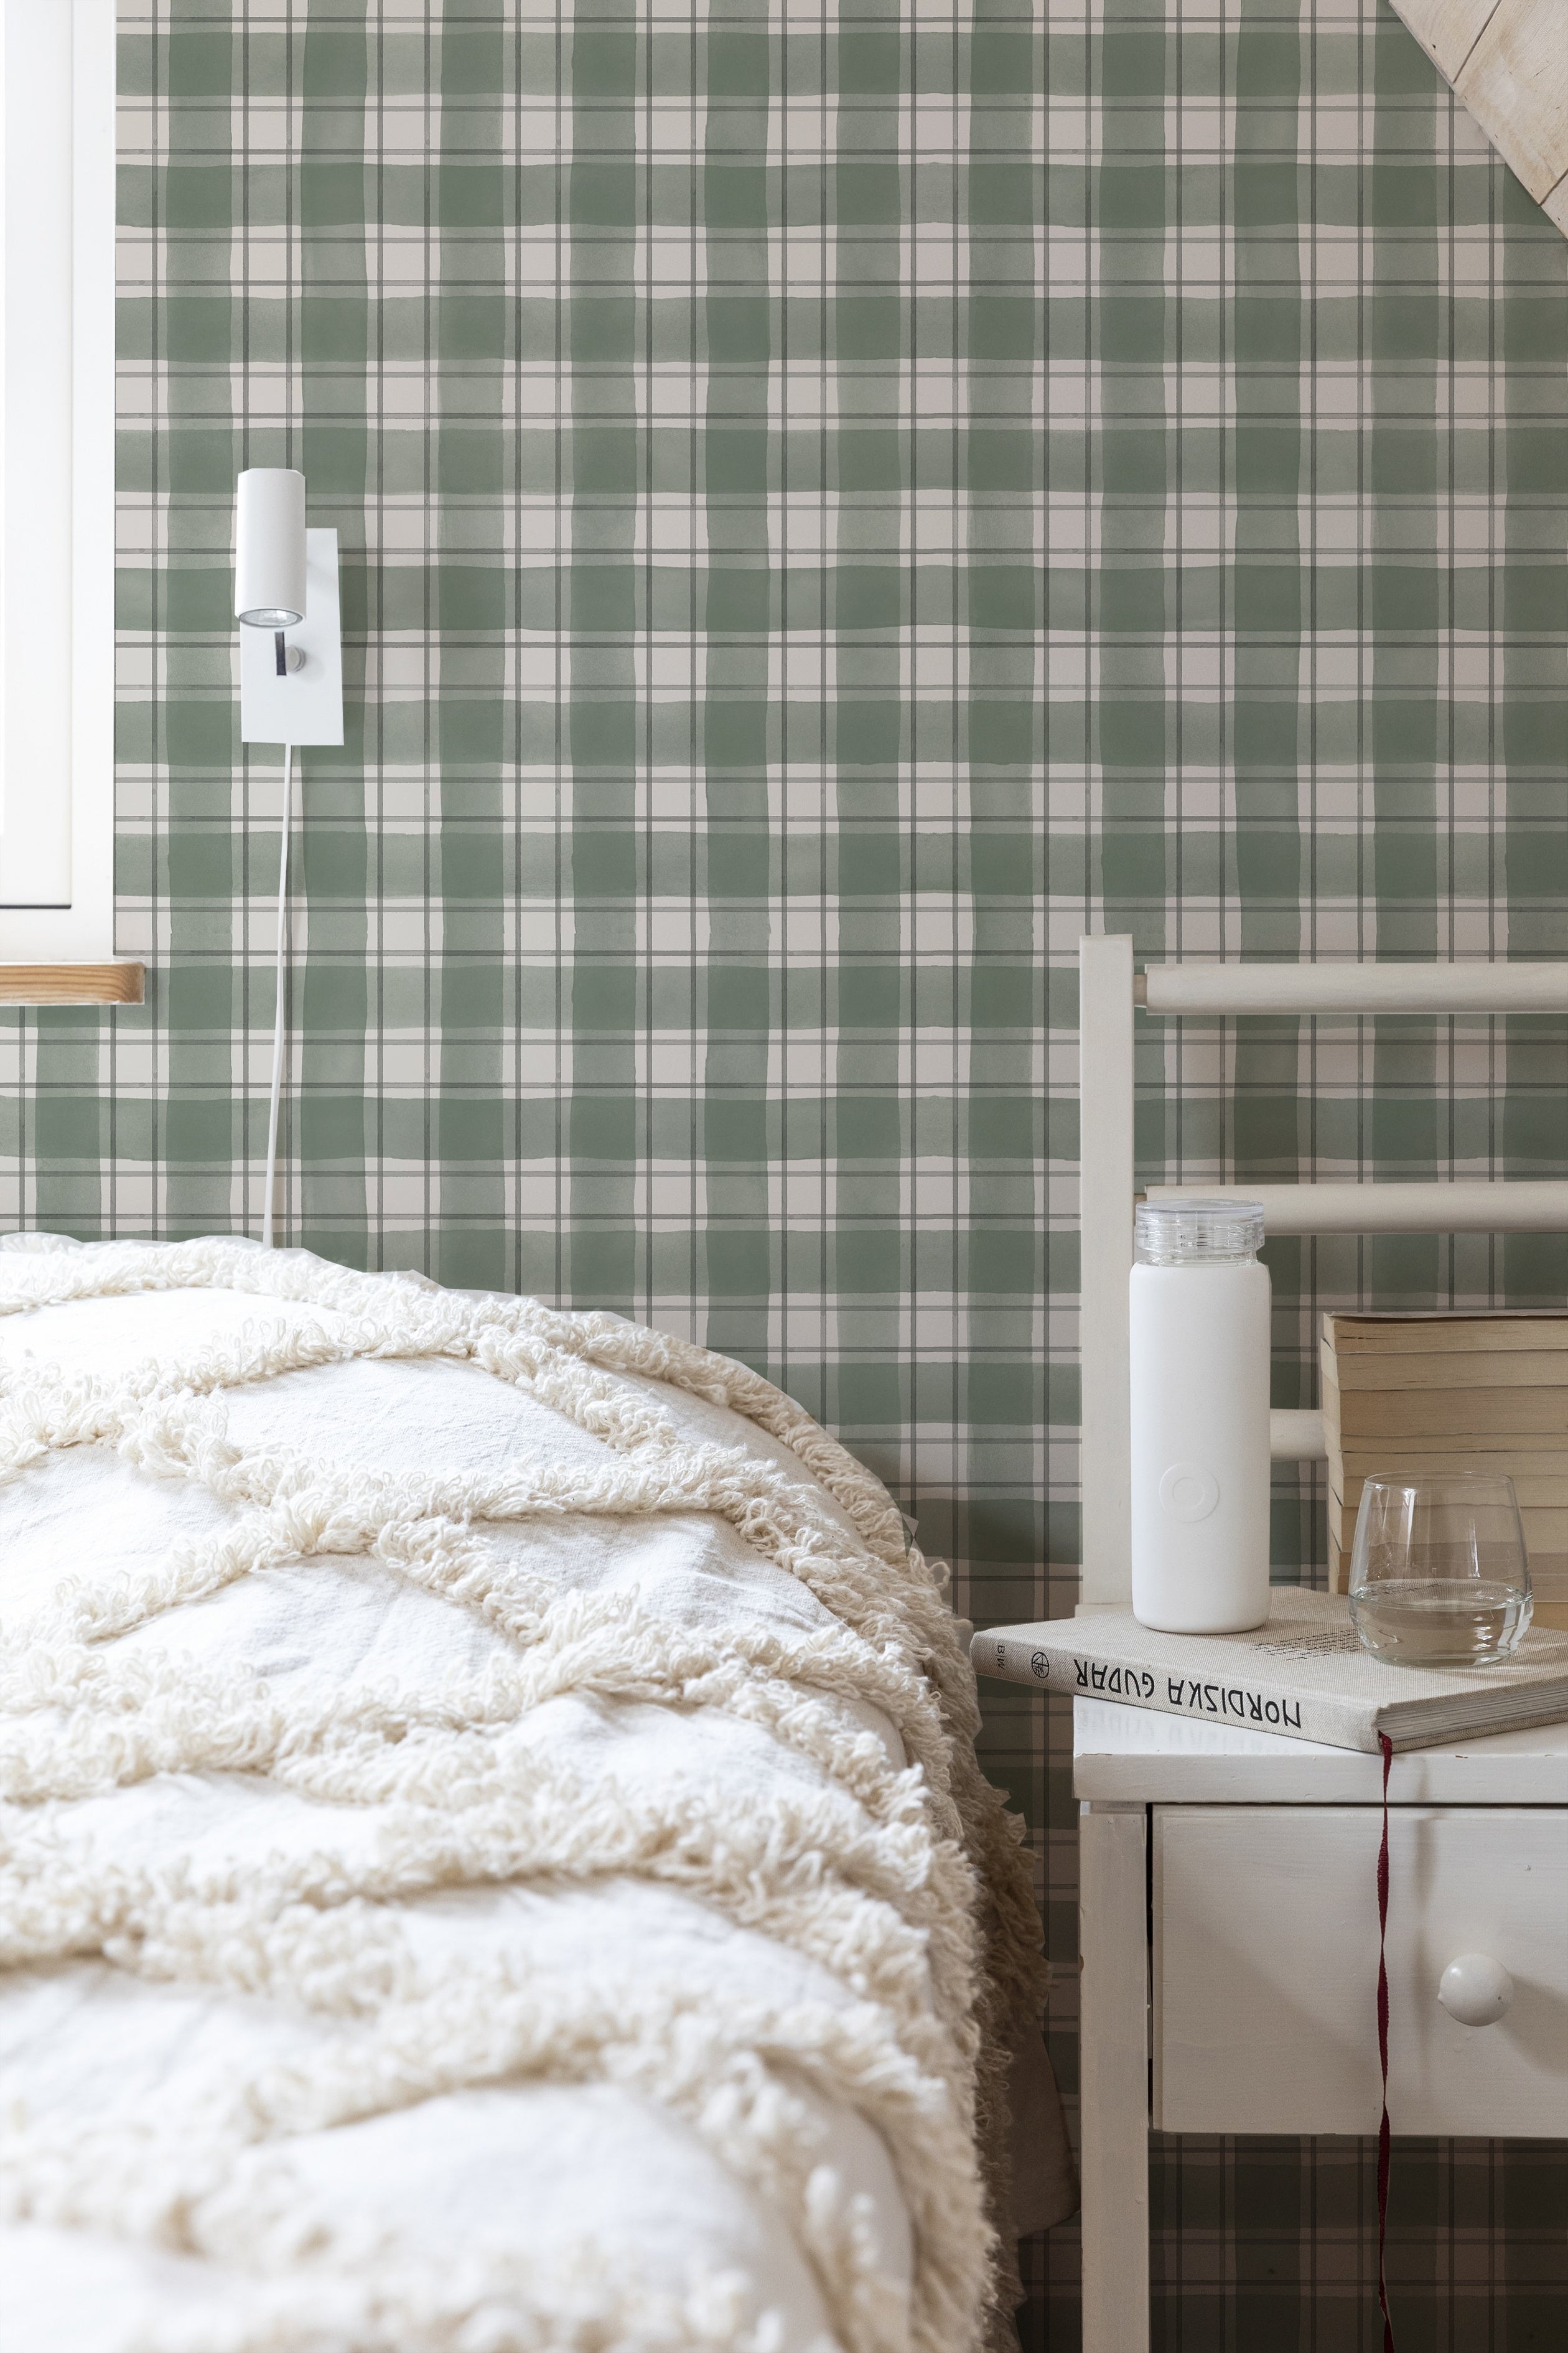 A cozy bedroom featuring a green buffalo check pattern on the walls. The room is furnished with a fluffy white comforter on the bed, a minimalist white nightstand, and a small lamp.